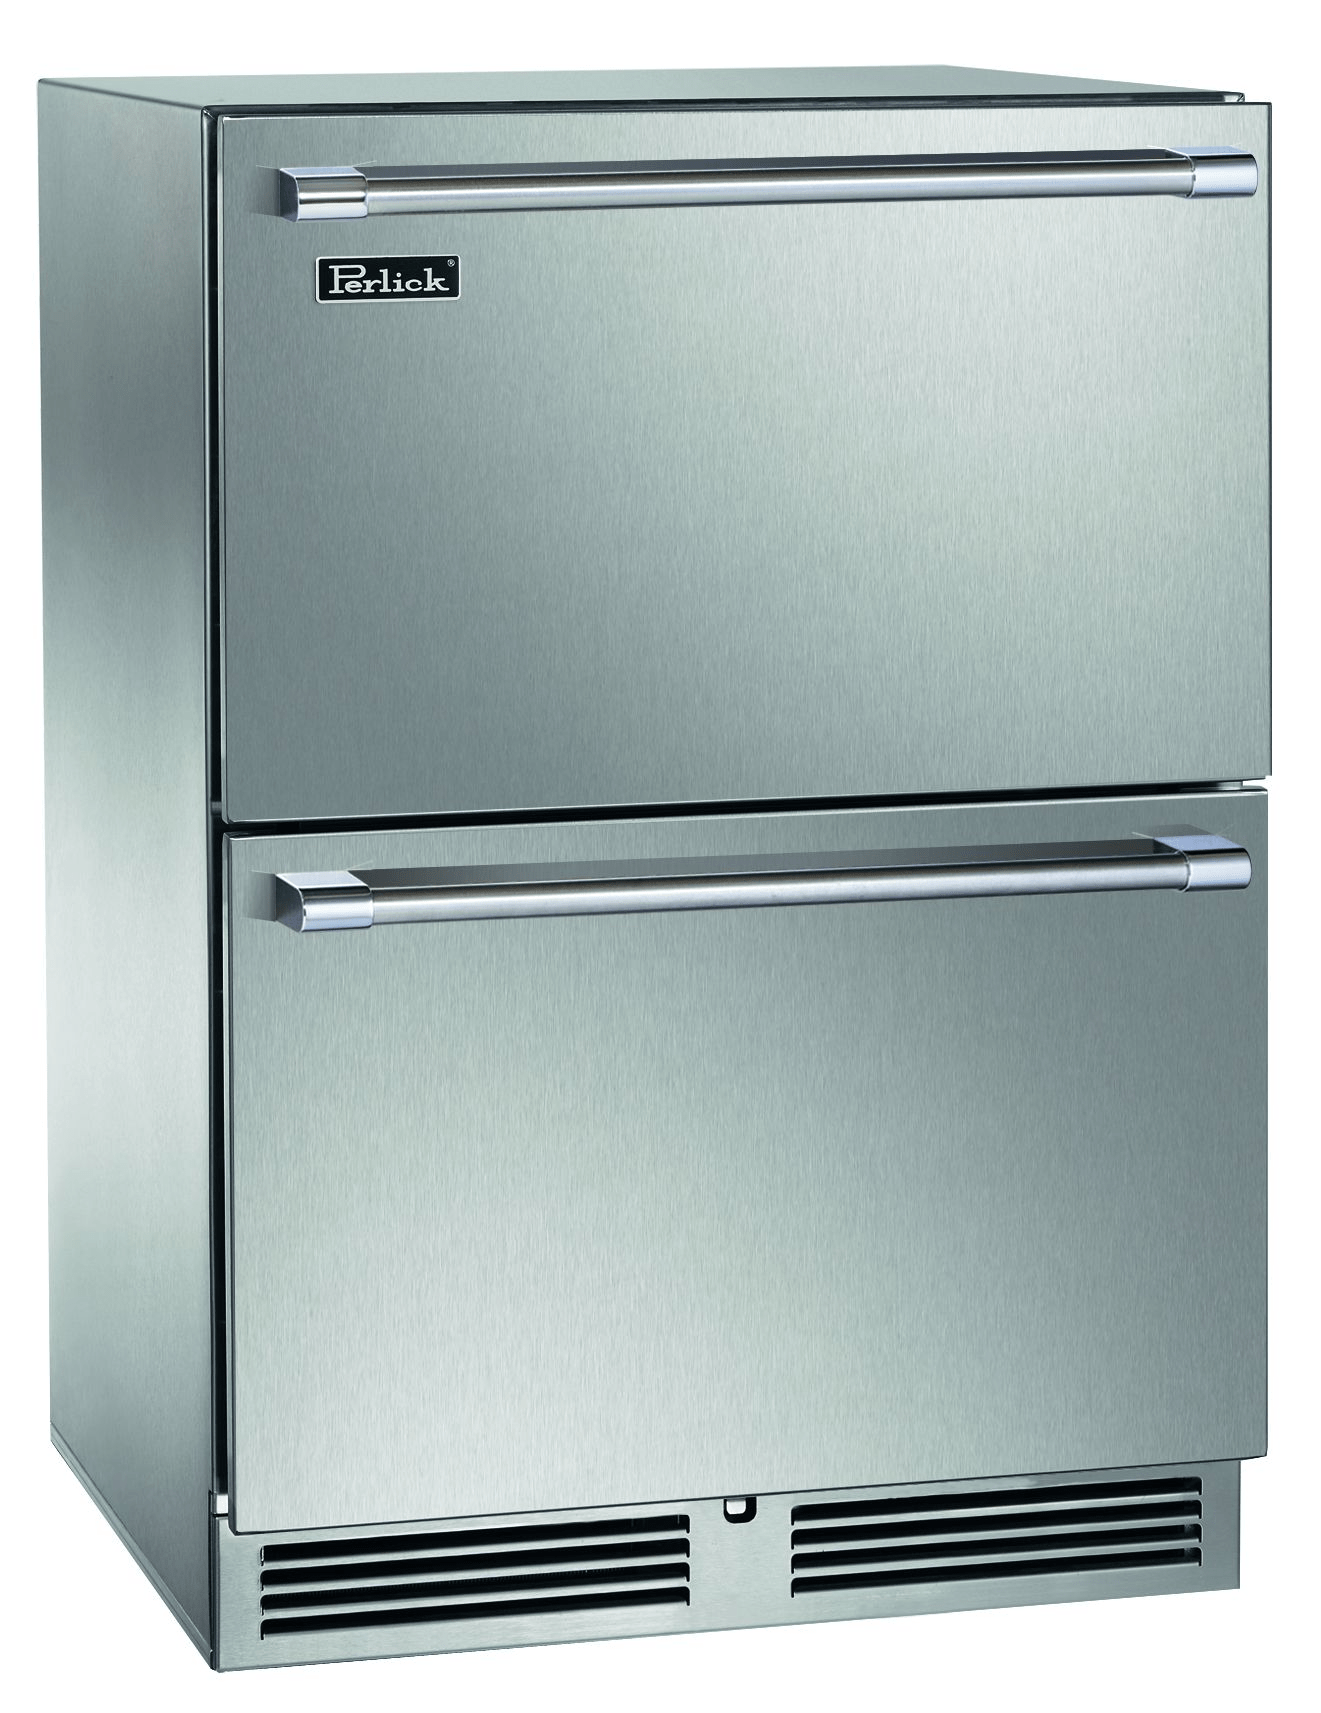 Perlick Refrigeration + Cooling Stainless Steel Drawers Perlick 24" Signature Series Freezer Drawers / HP24FO-4 Drawers